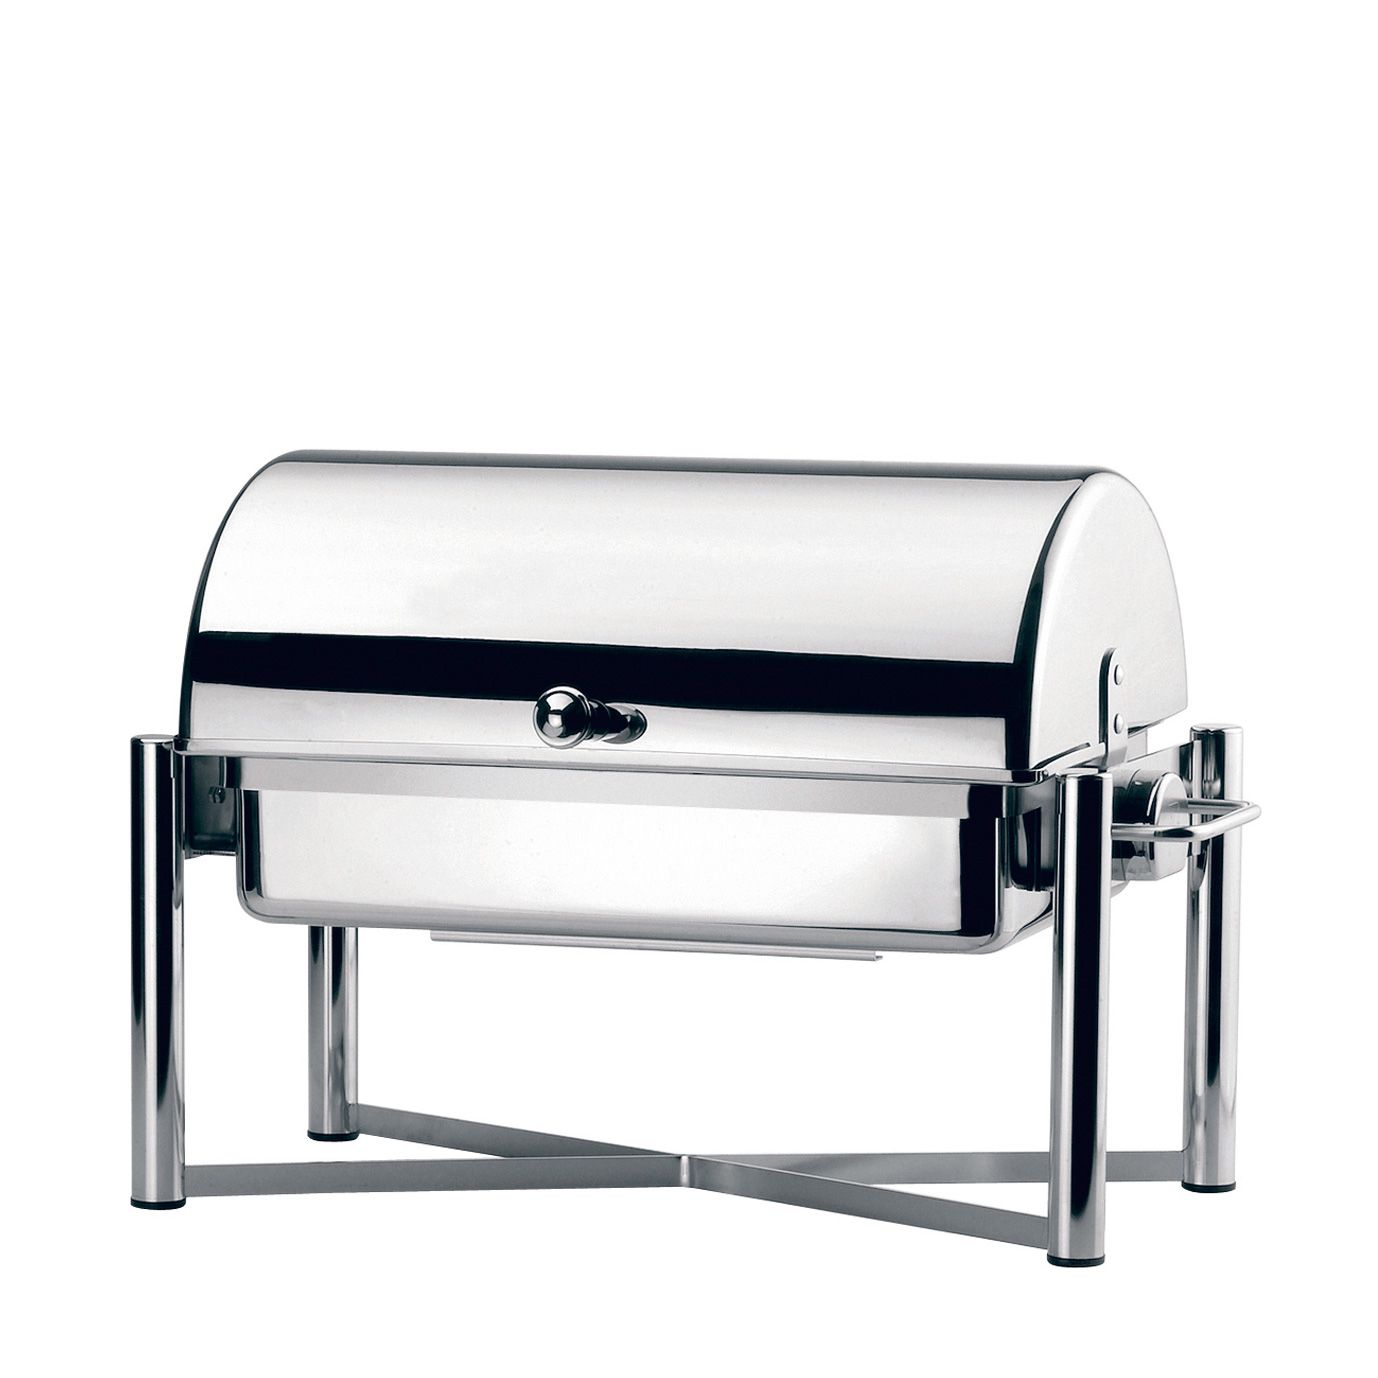 Hepp - Chafing Dish GN 1/1 Excellent